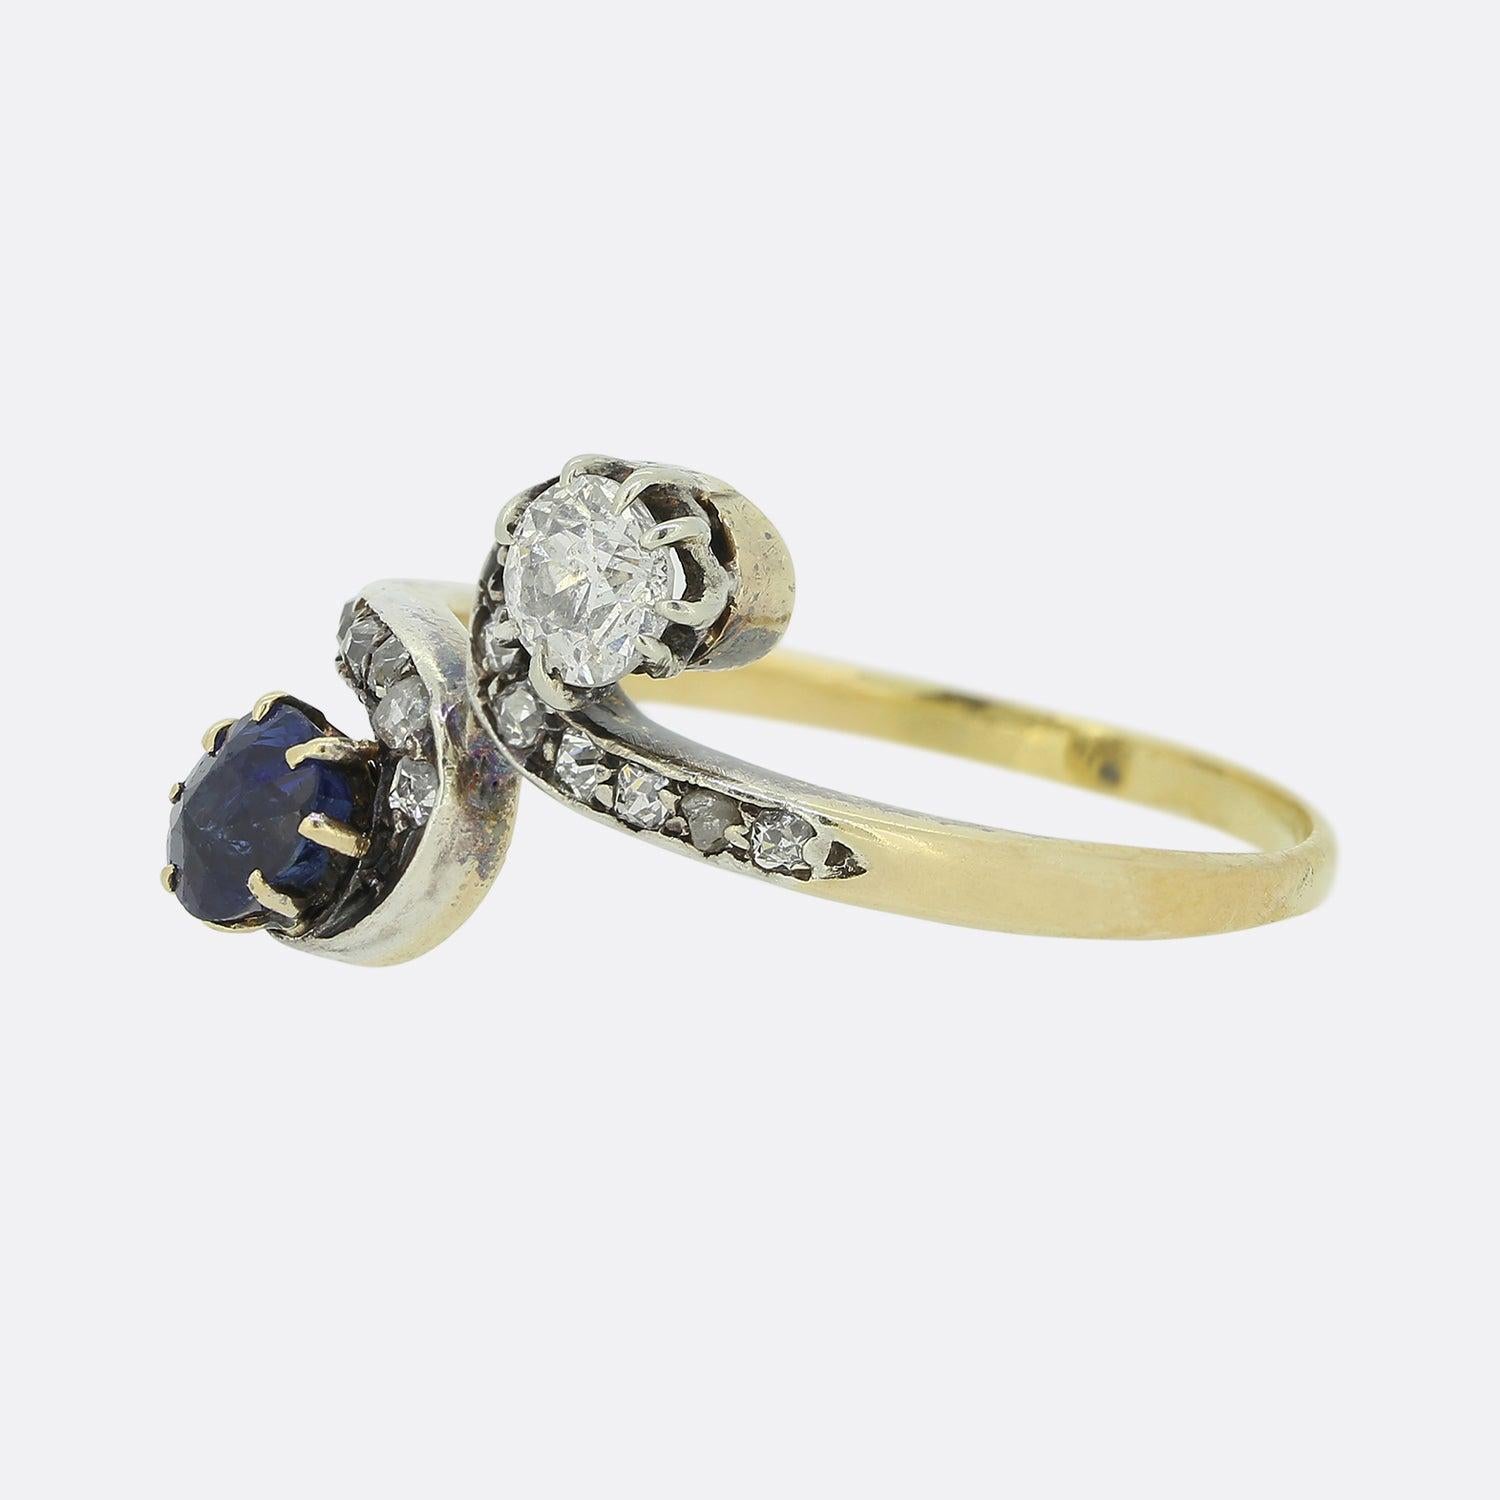 This is an 18ct yellow gold sapphire and diamond ring from the Edwardian era. The ring features a beautiful natural blue sapphire and old cut diamond in a twisted style setting crafted in 18ct yellow gold and platinum with diamond set shoulders.